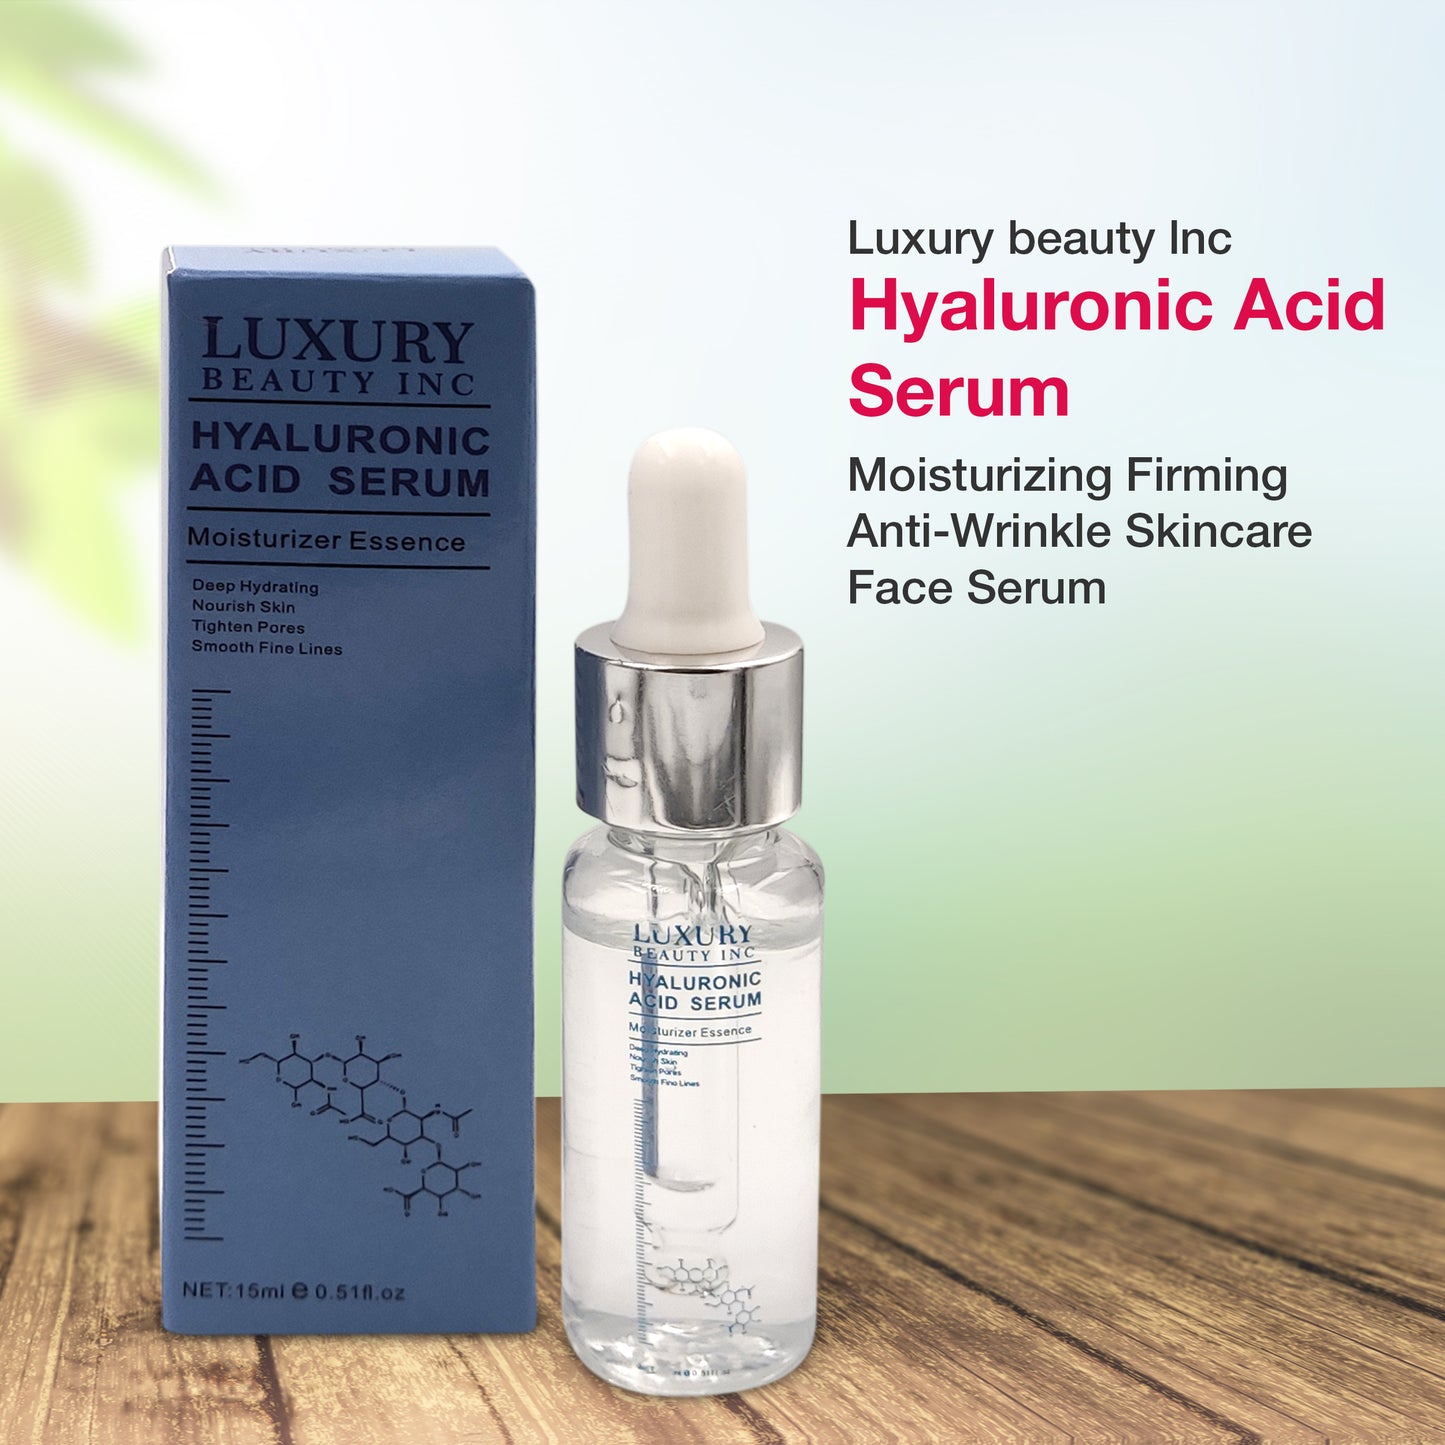 Luxury Beauty Inc 4D Hyaluronic Acid Facial Serum: Anti-Aging Moisturizer & Skin Care Solution to Reduce Eye Bags, Dark Spots & Fine Lines, Tightening Sagging Skin and Firming Wrinkles.